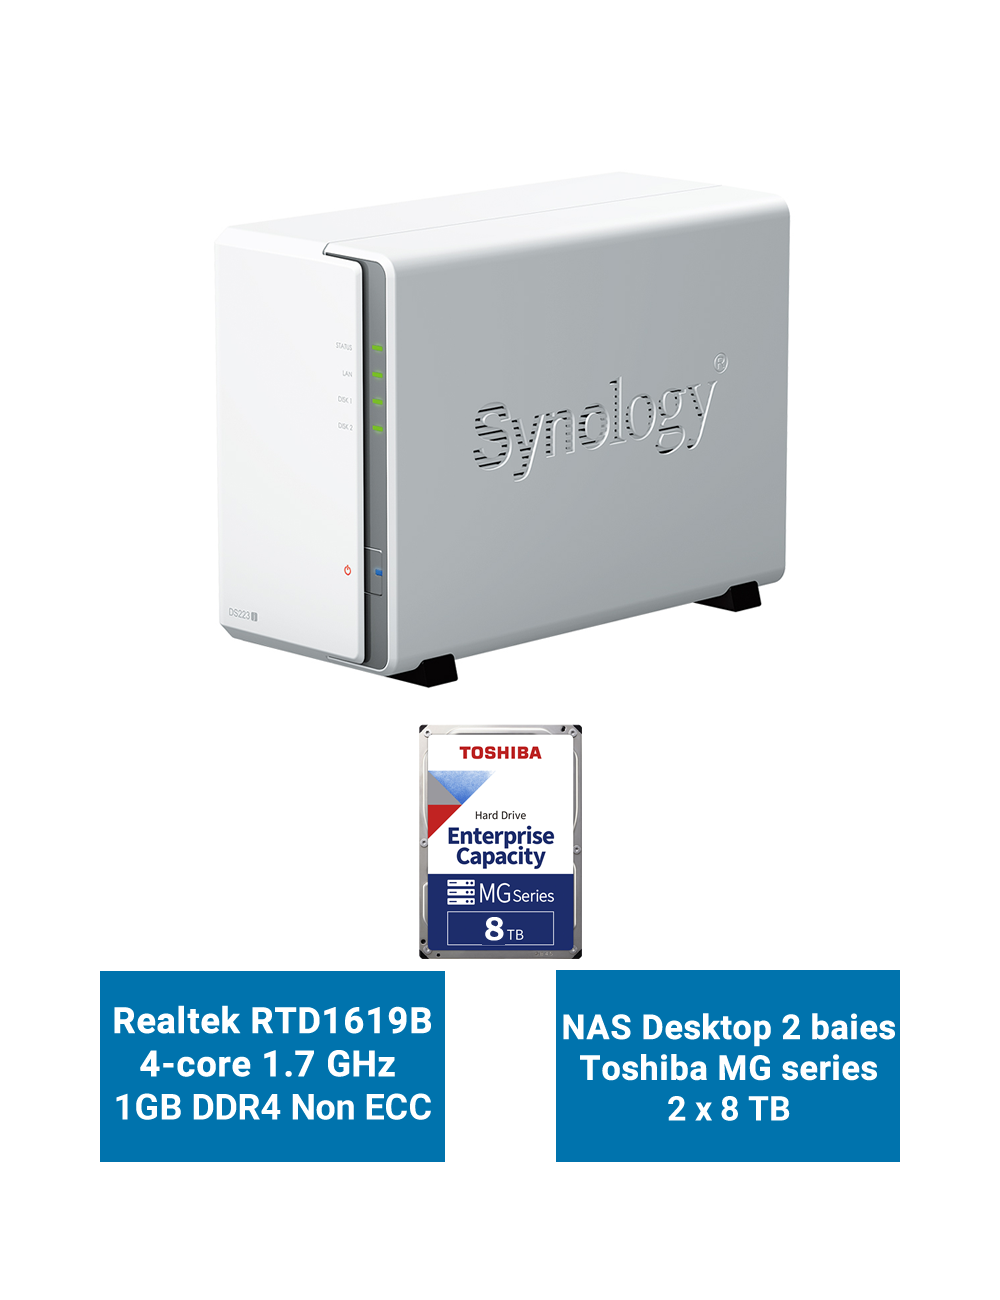 Synology DiskStation DS223J Serveur NAS WD RED PLUS 16To (2x8To)